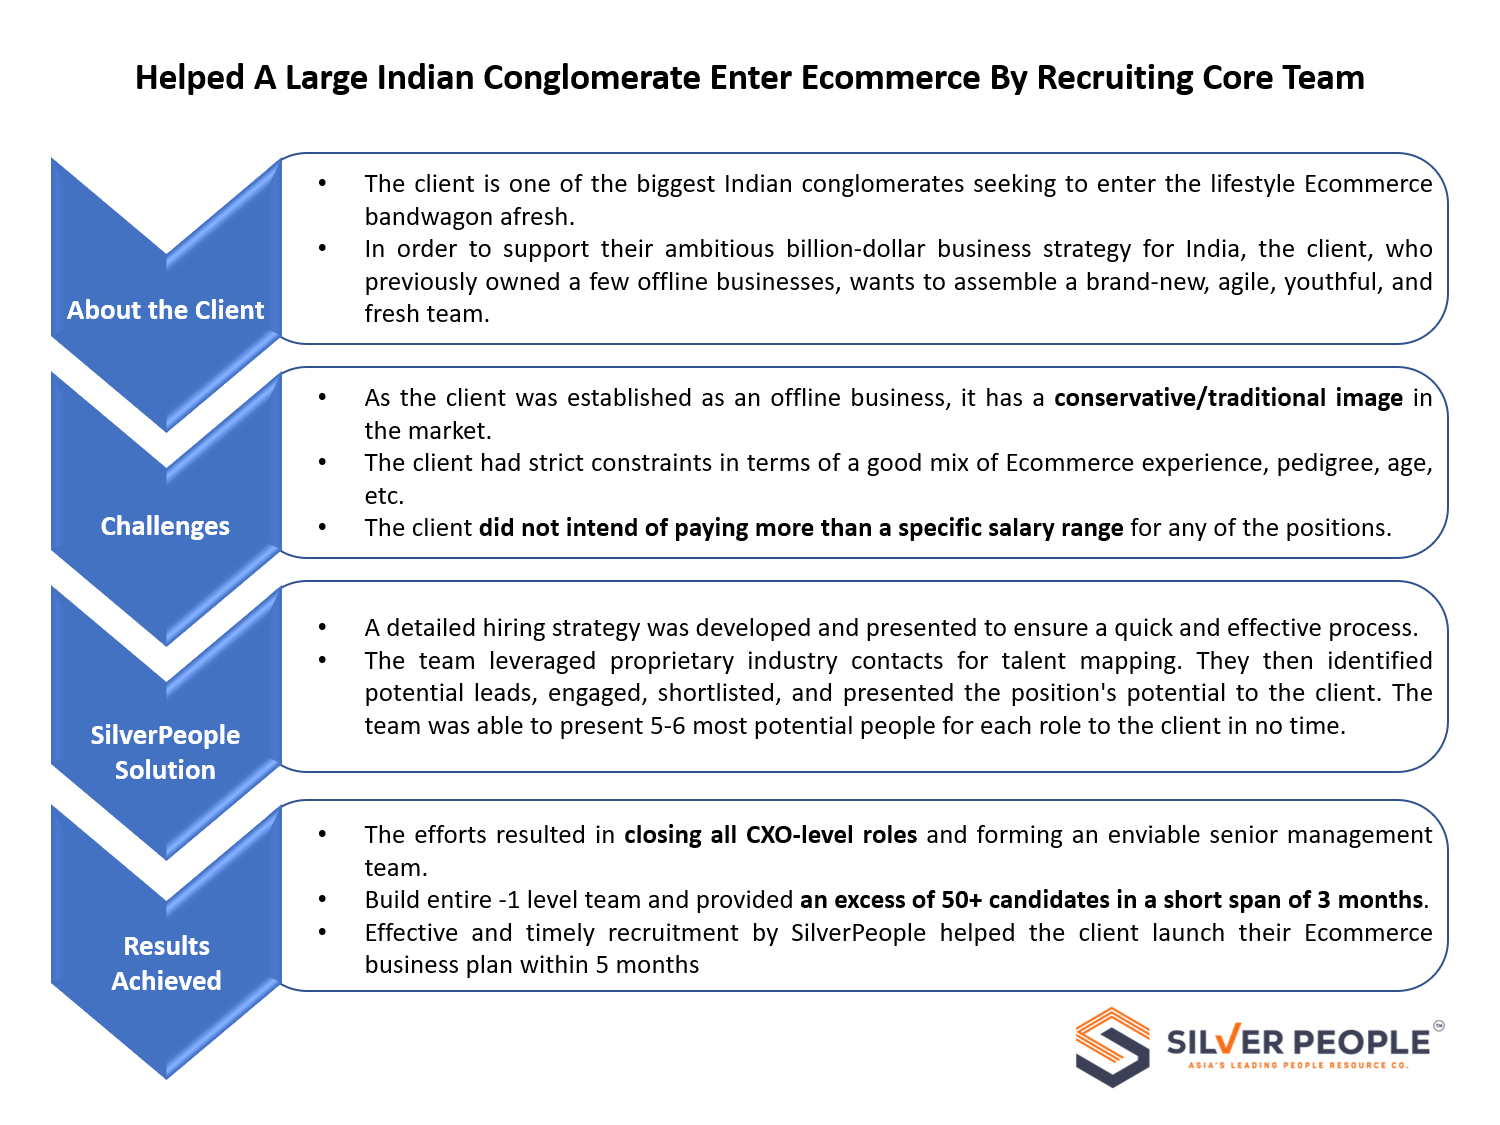 Helped a Large Indian Conglomerate Enter Ecommerce by Recruiting Core Team